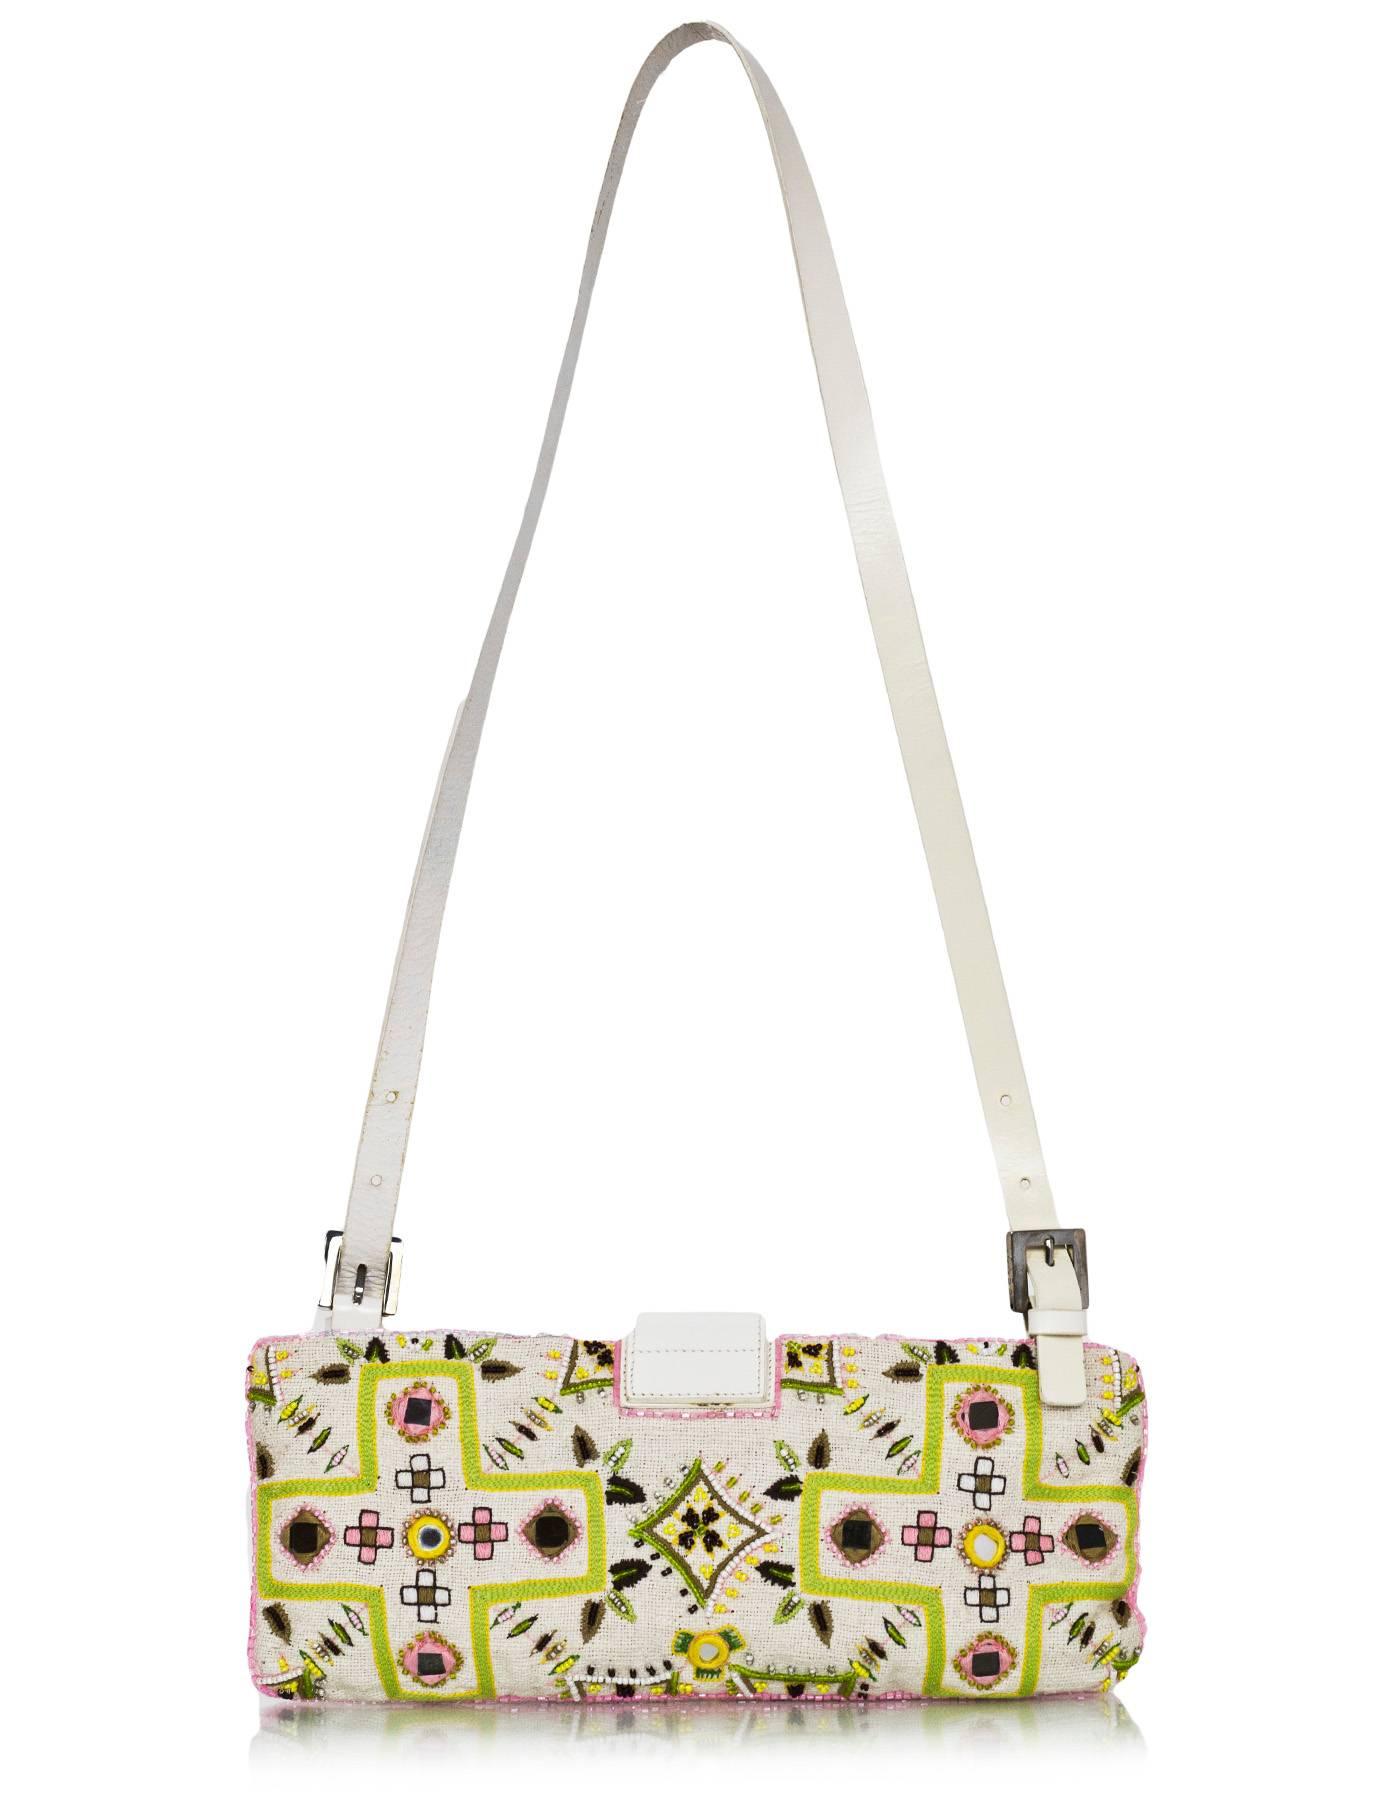 Fendi White & Green Beaded Baguette
Features fringe trim

Made In: Italy
Color: White, green, pink
Hardware: Silvertone
Materials: Cotton, beads, leather
Lining: Yellow nylon-blend textile
Closure/Opening: Zip top with center flap FF